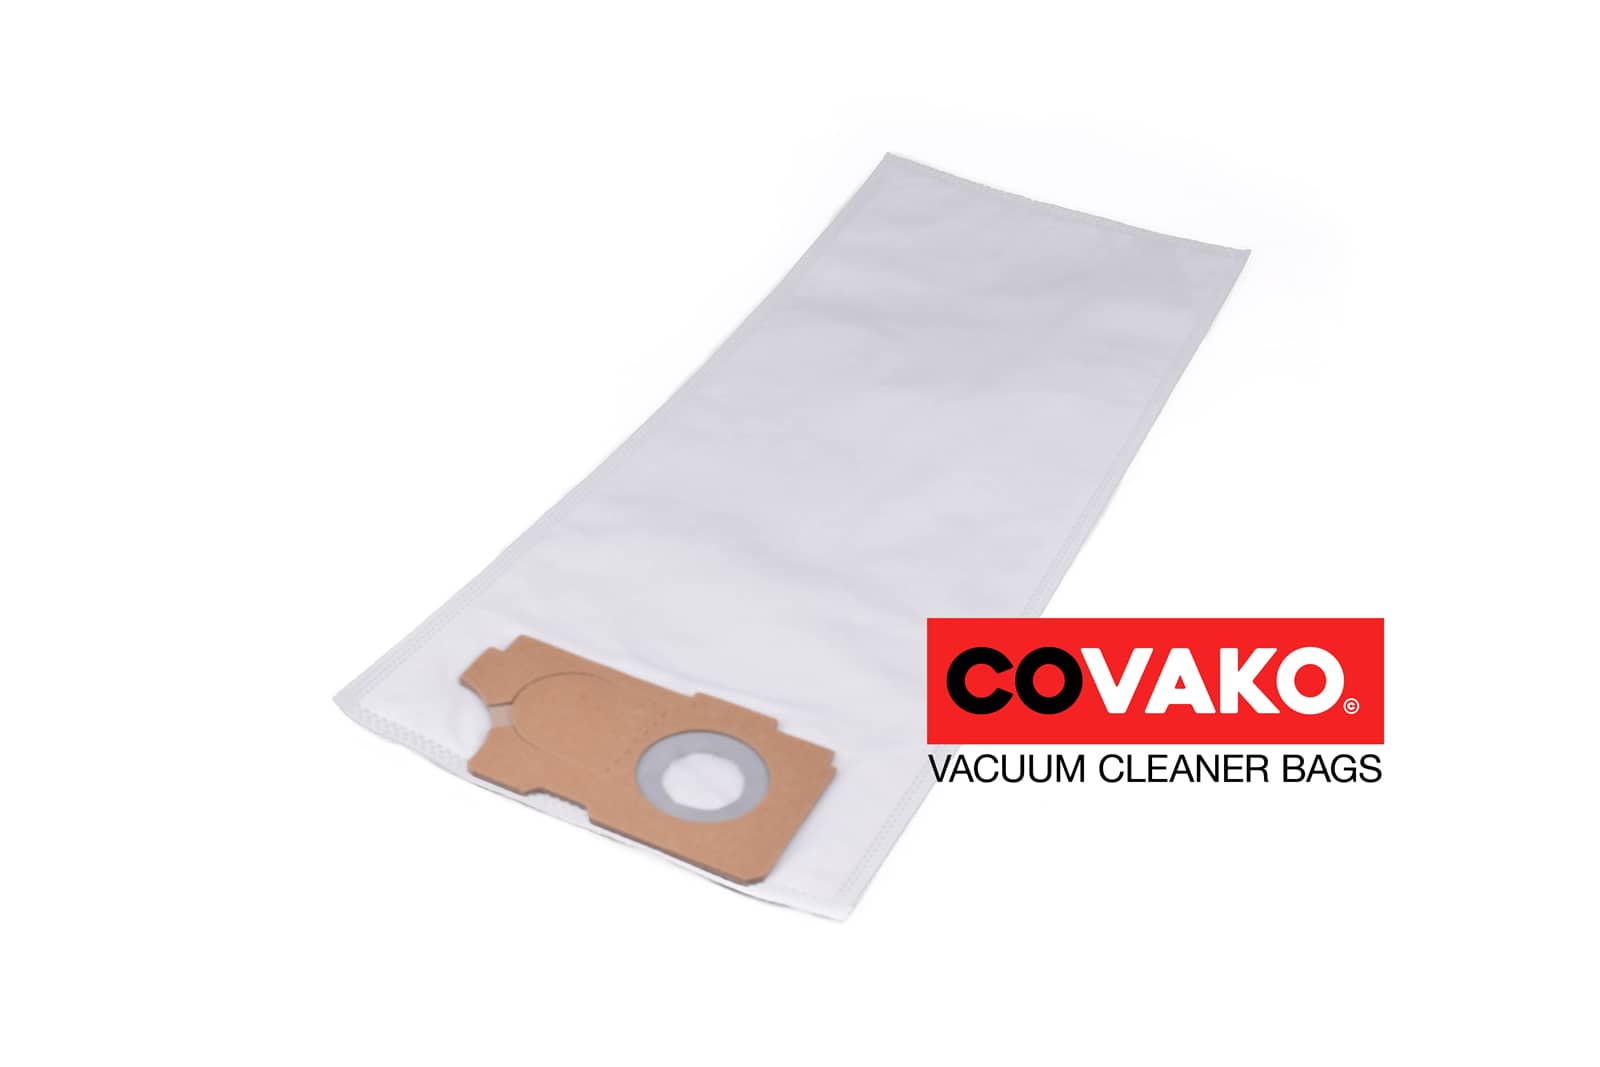 Fast Comfort 46 / Synthesis - Fast vacuum cleaner bags